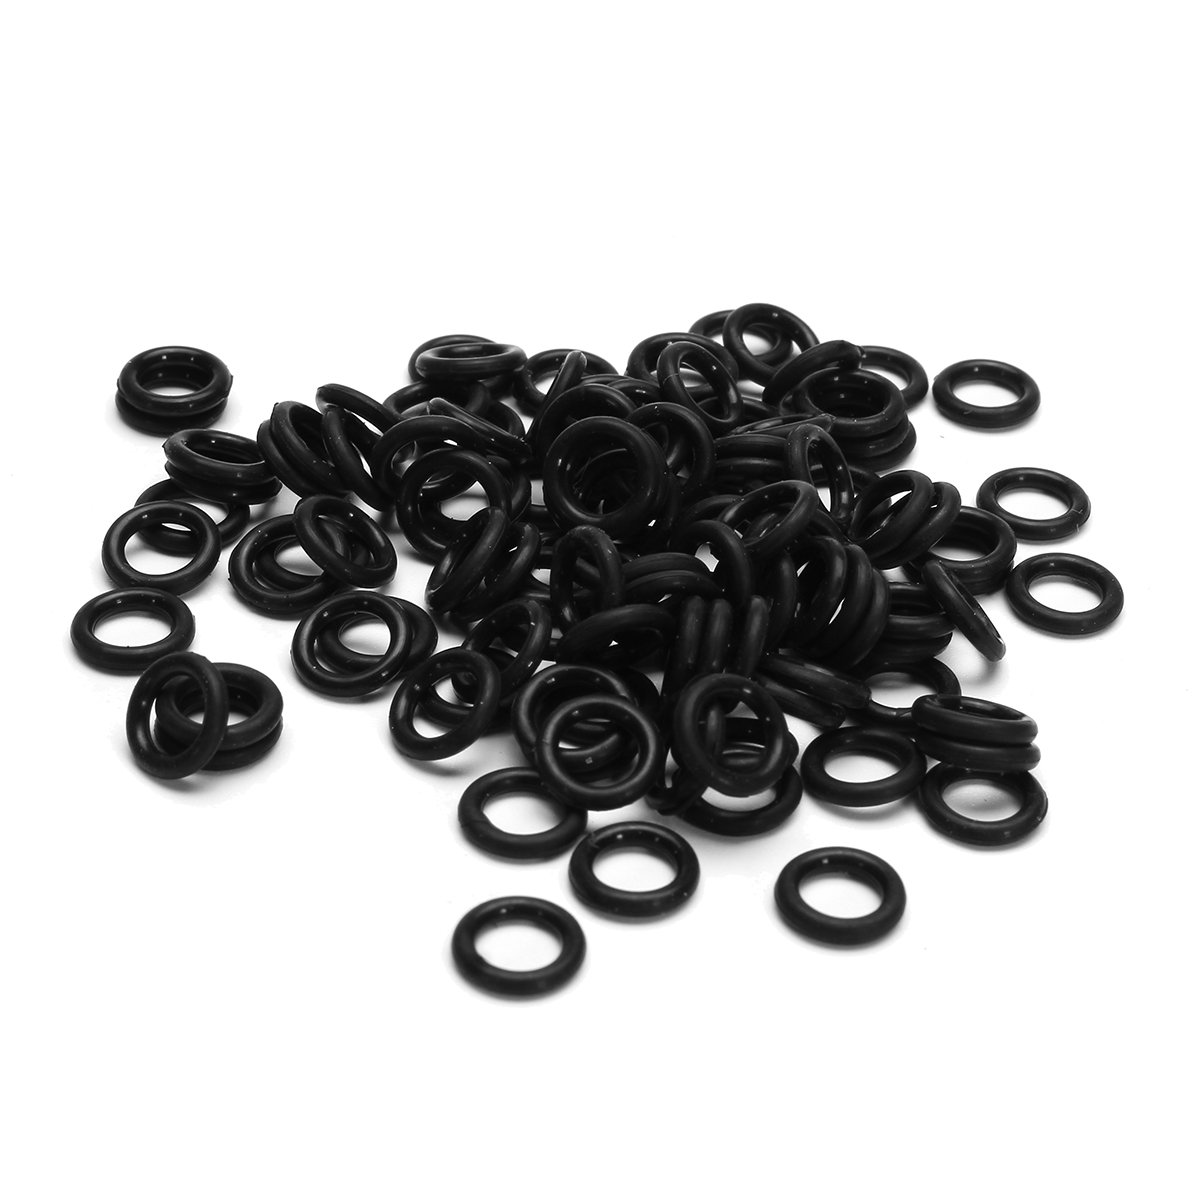 100 Mechanical Keyboard Keycap Rubber O-Ring Switch Dampeners for Cherry MX 2